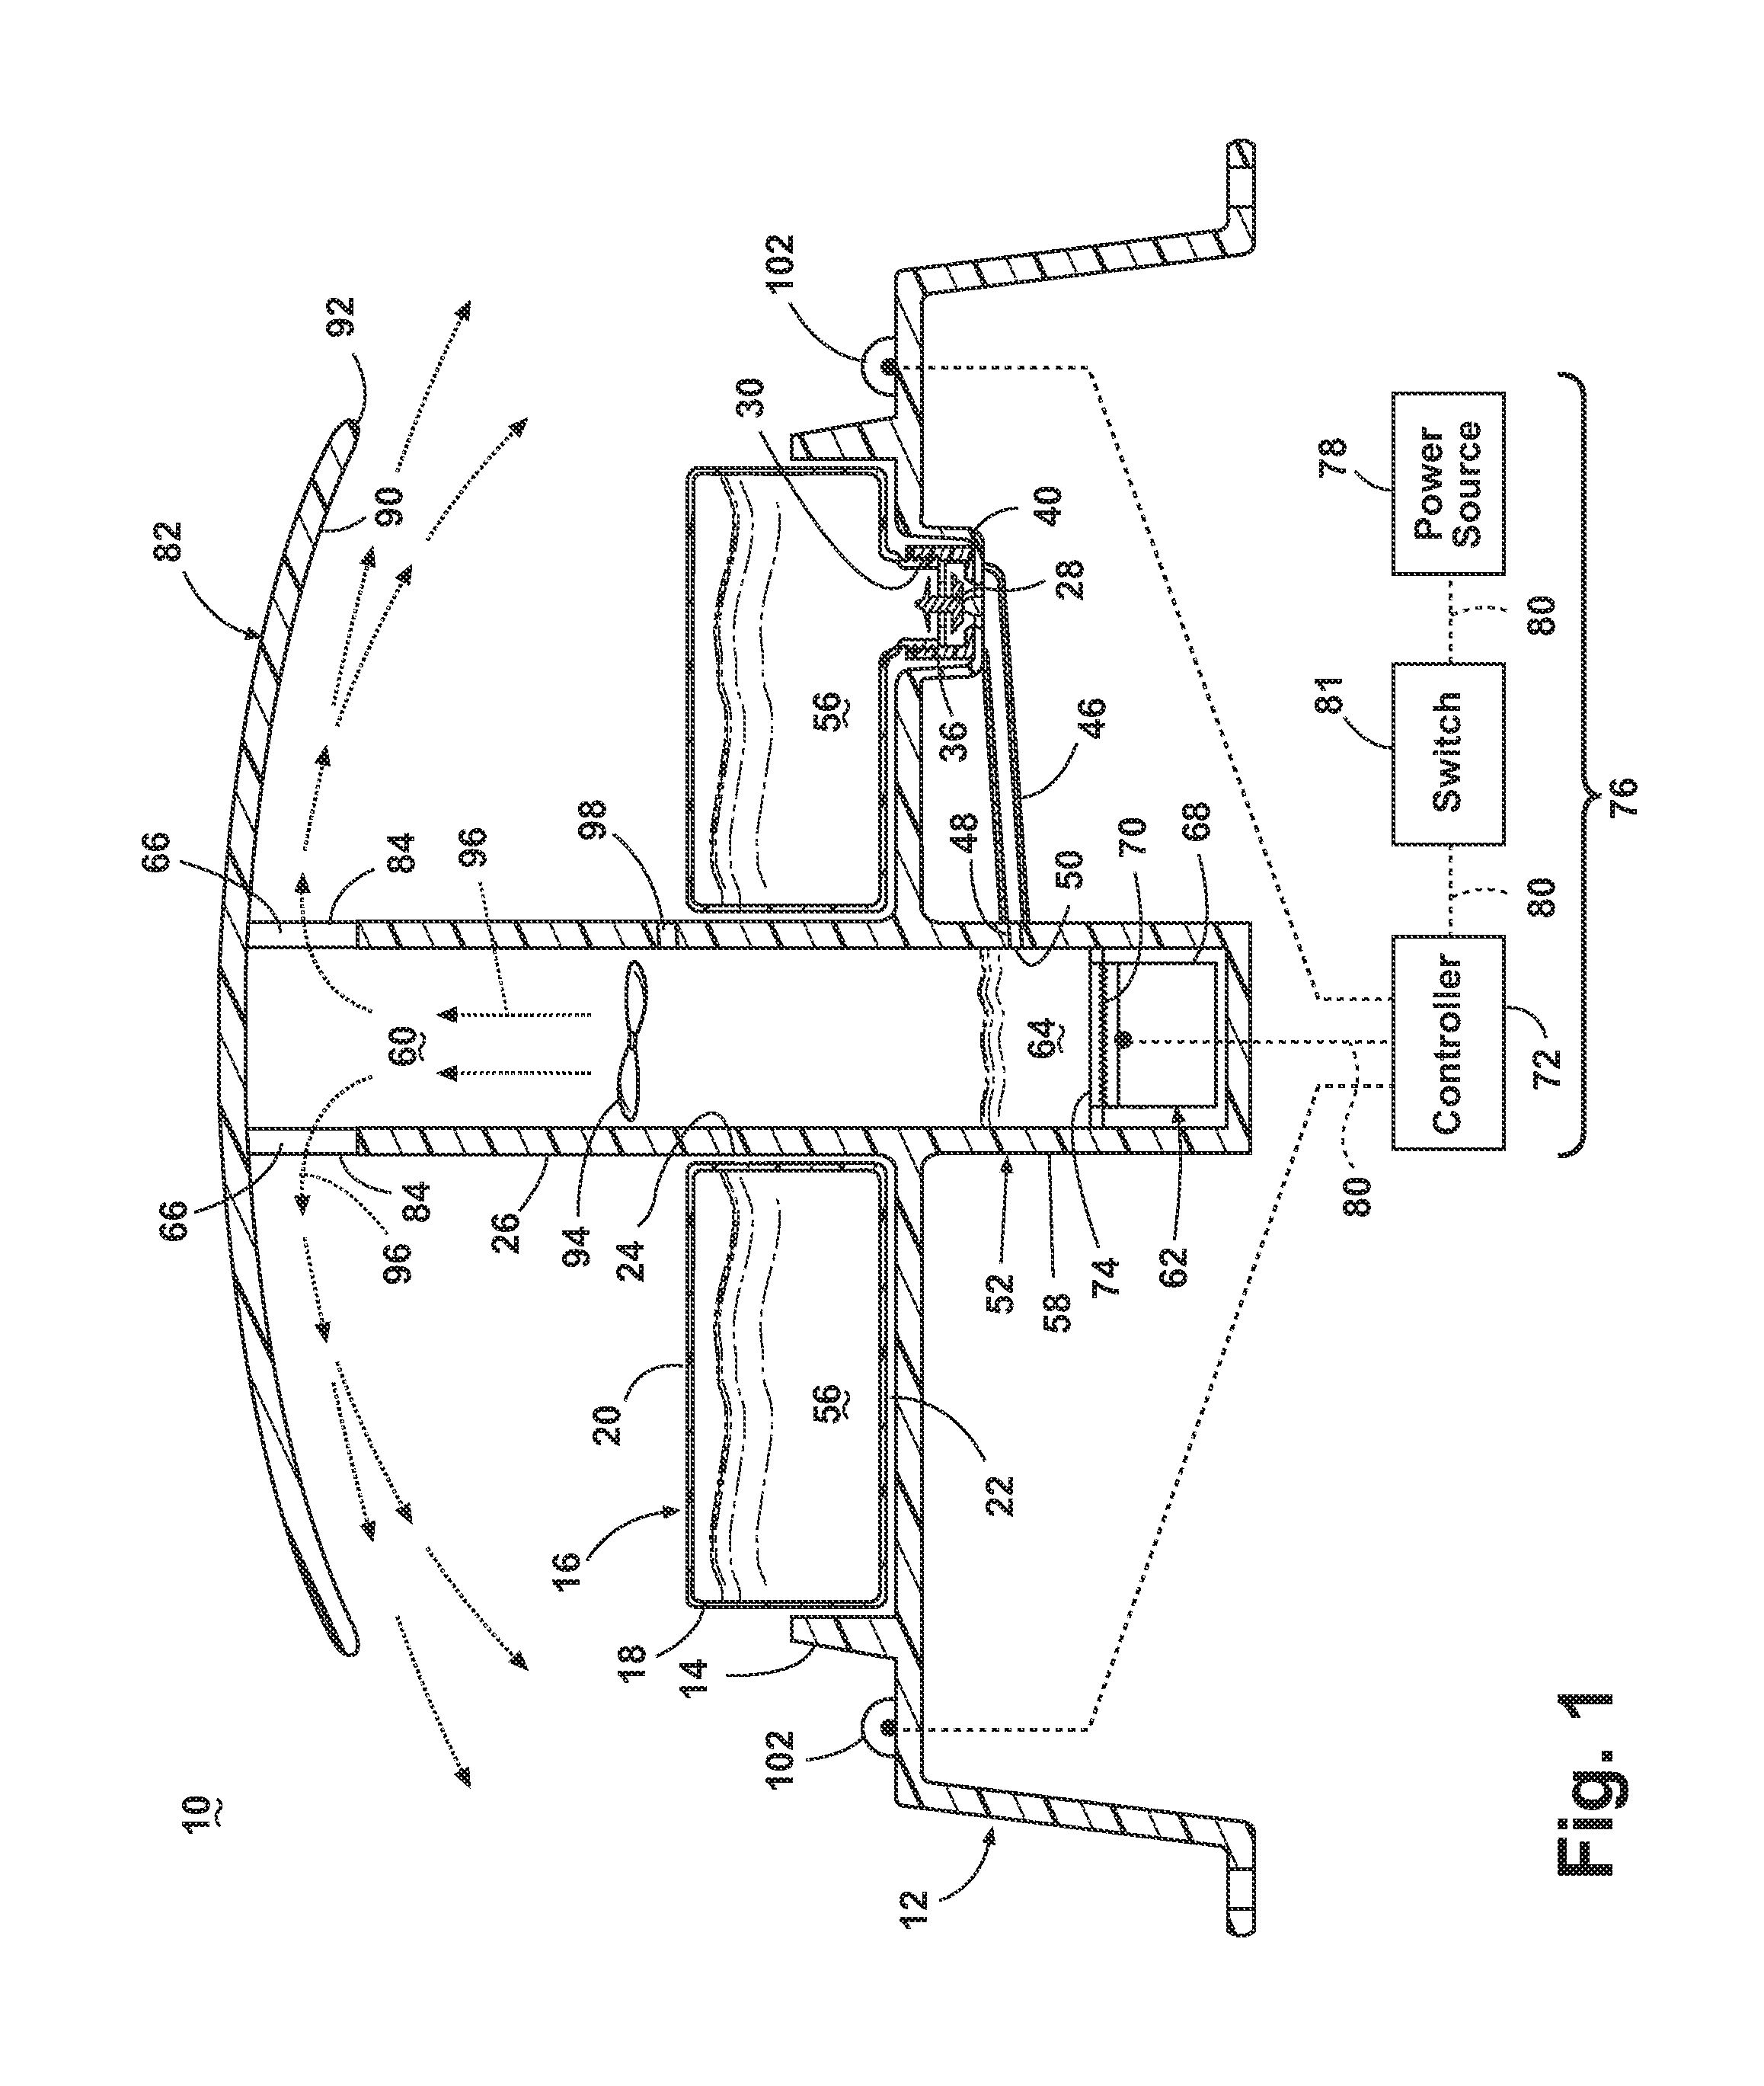 Cleaning implement with mist generating system